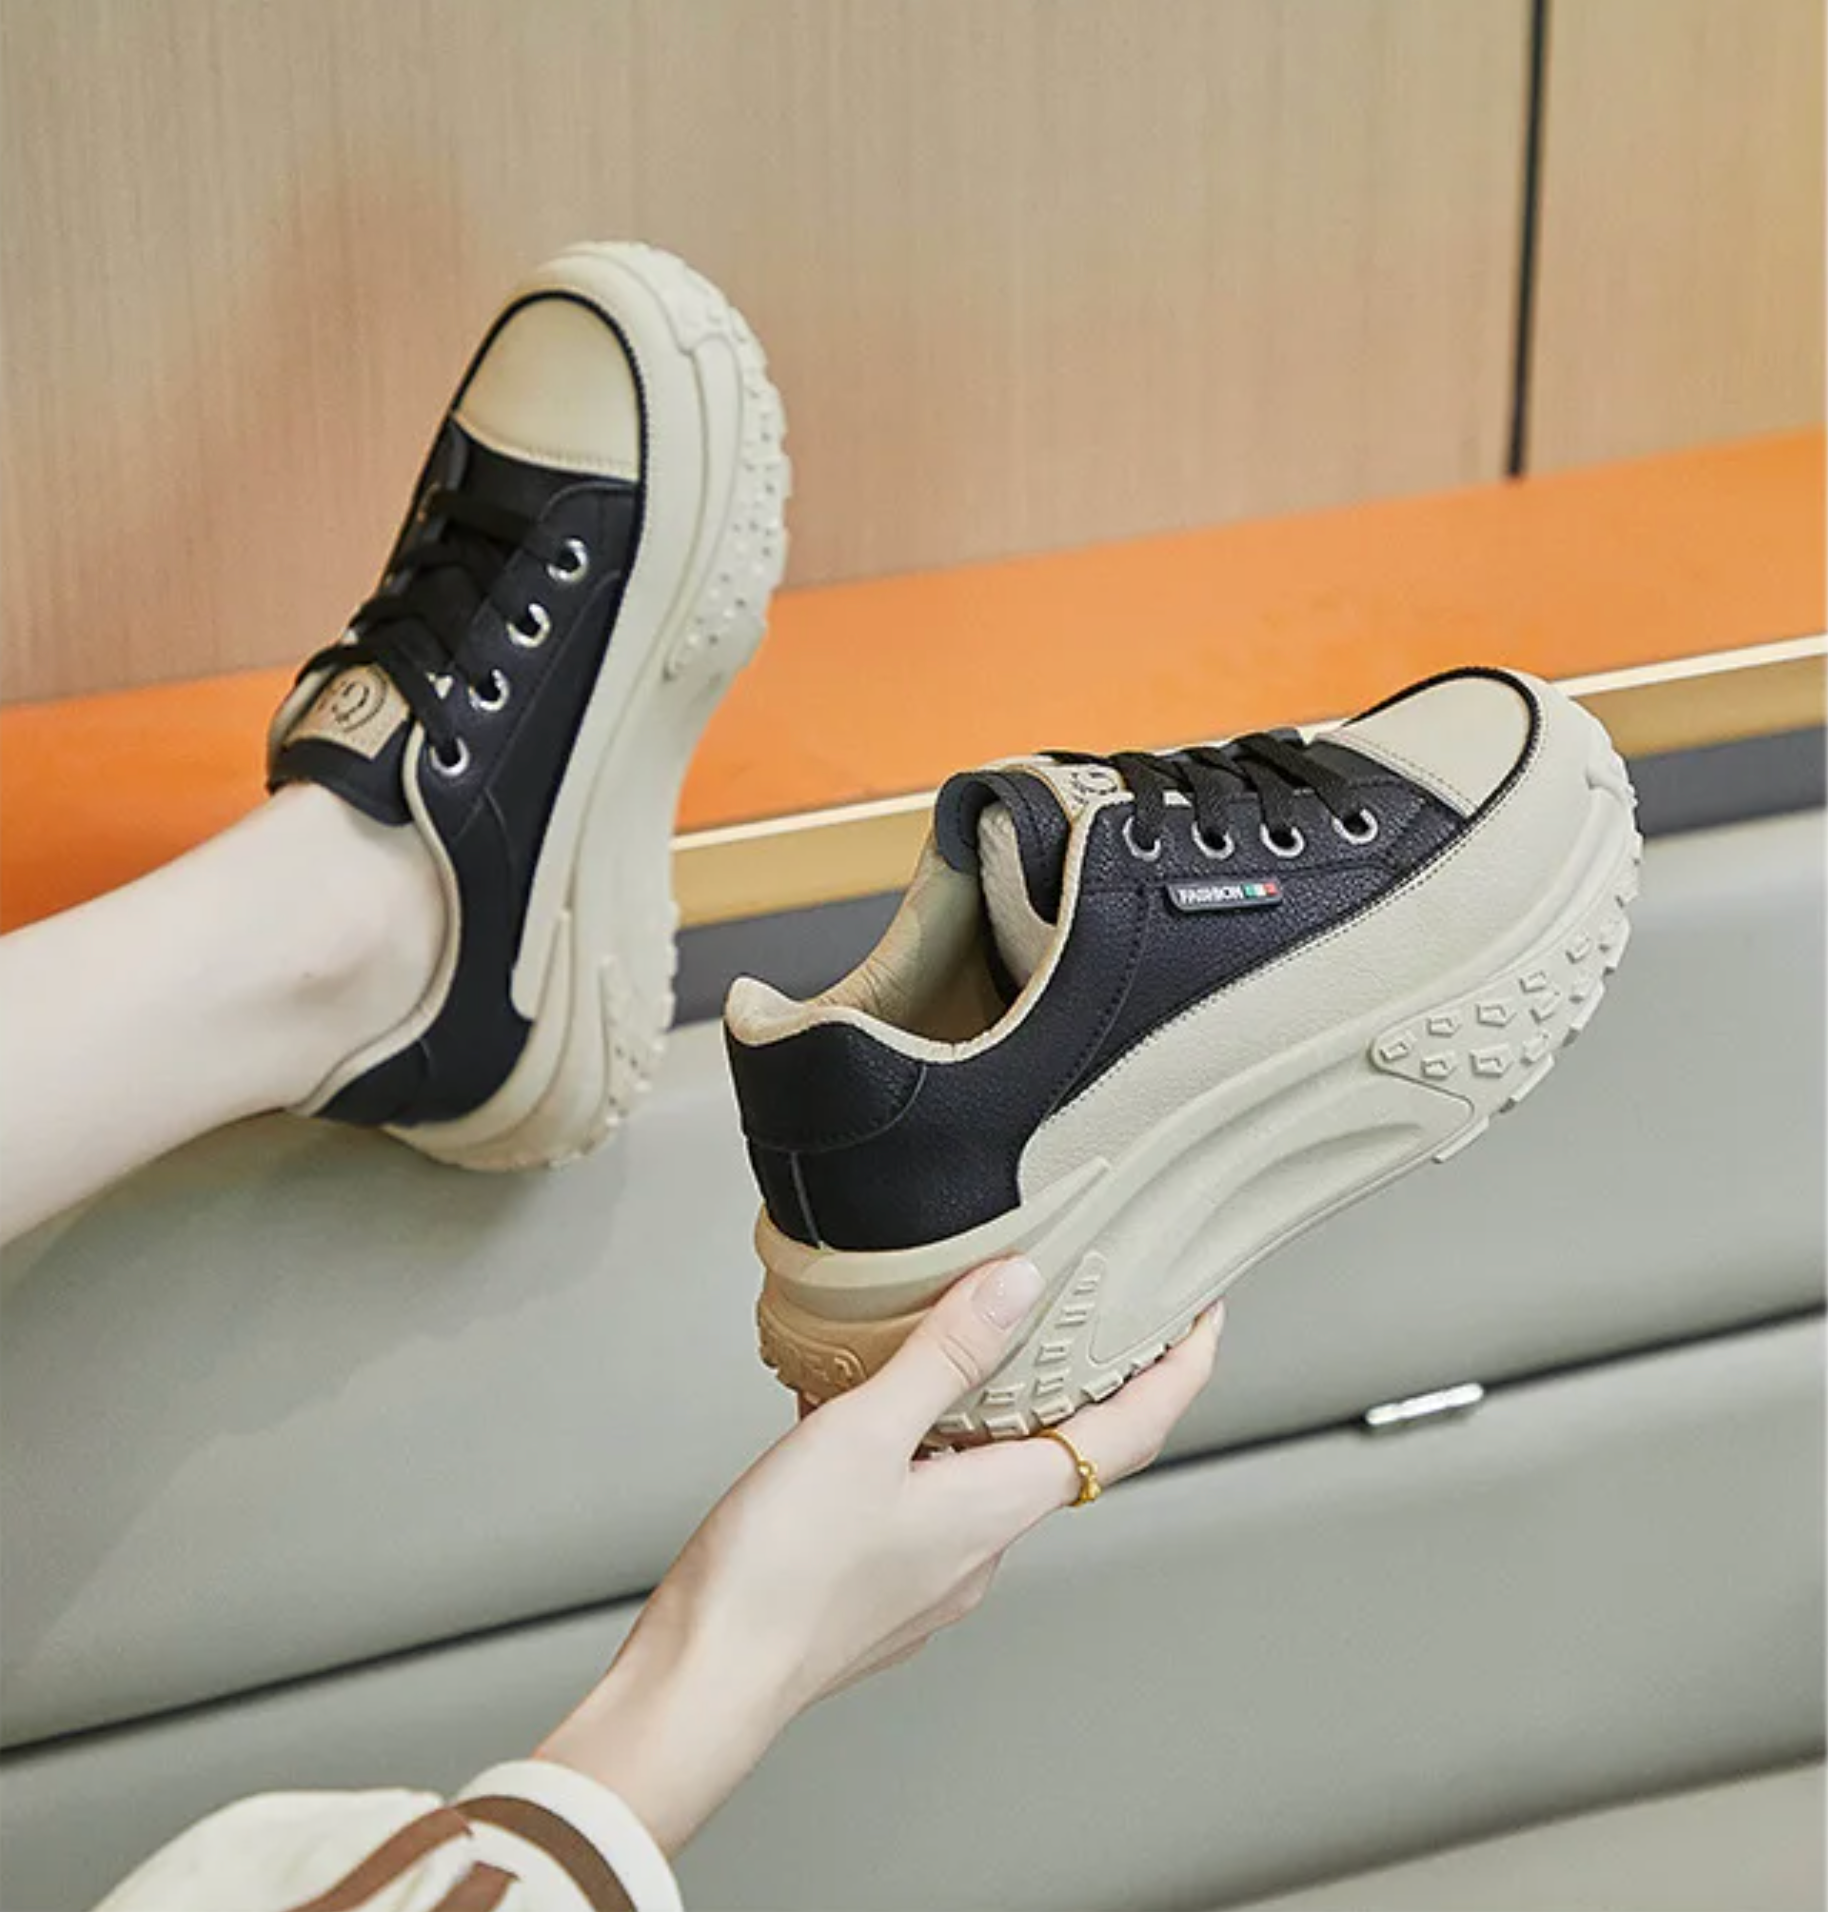 Trend Casual Orthopedic Heightening Shoes